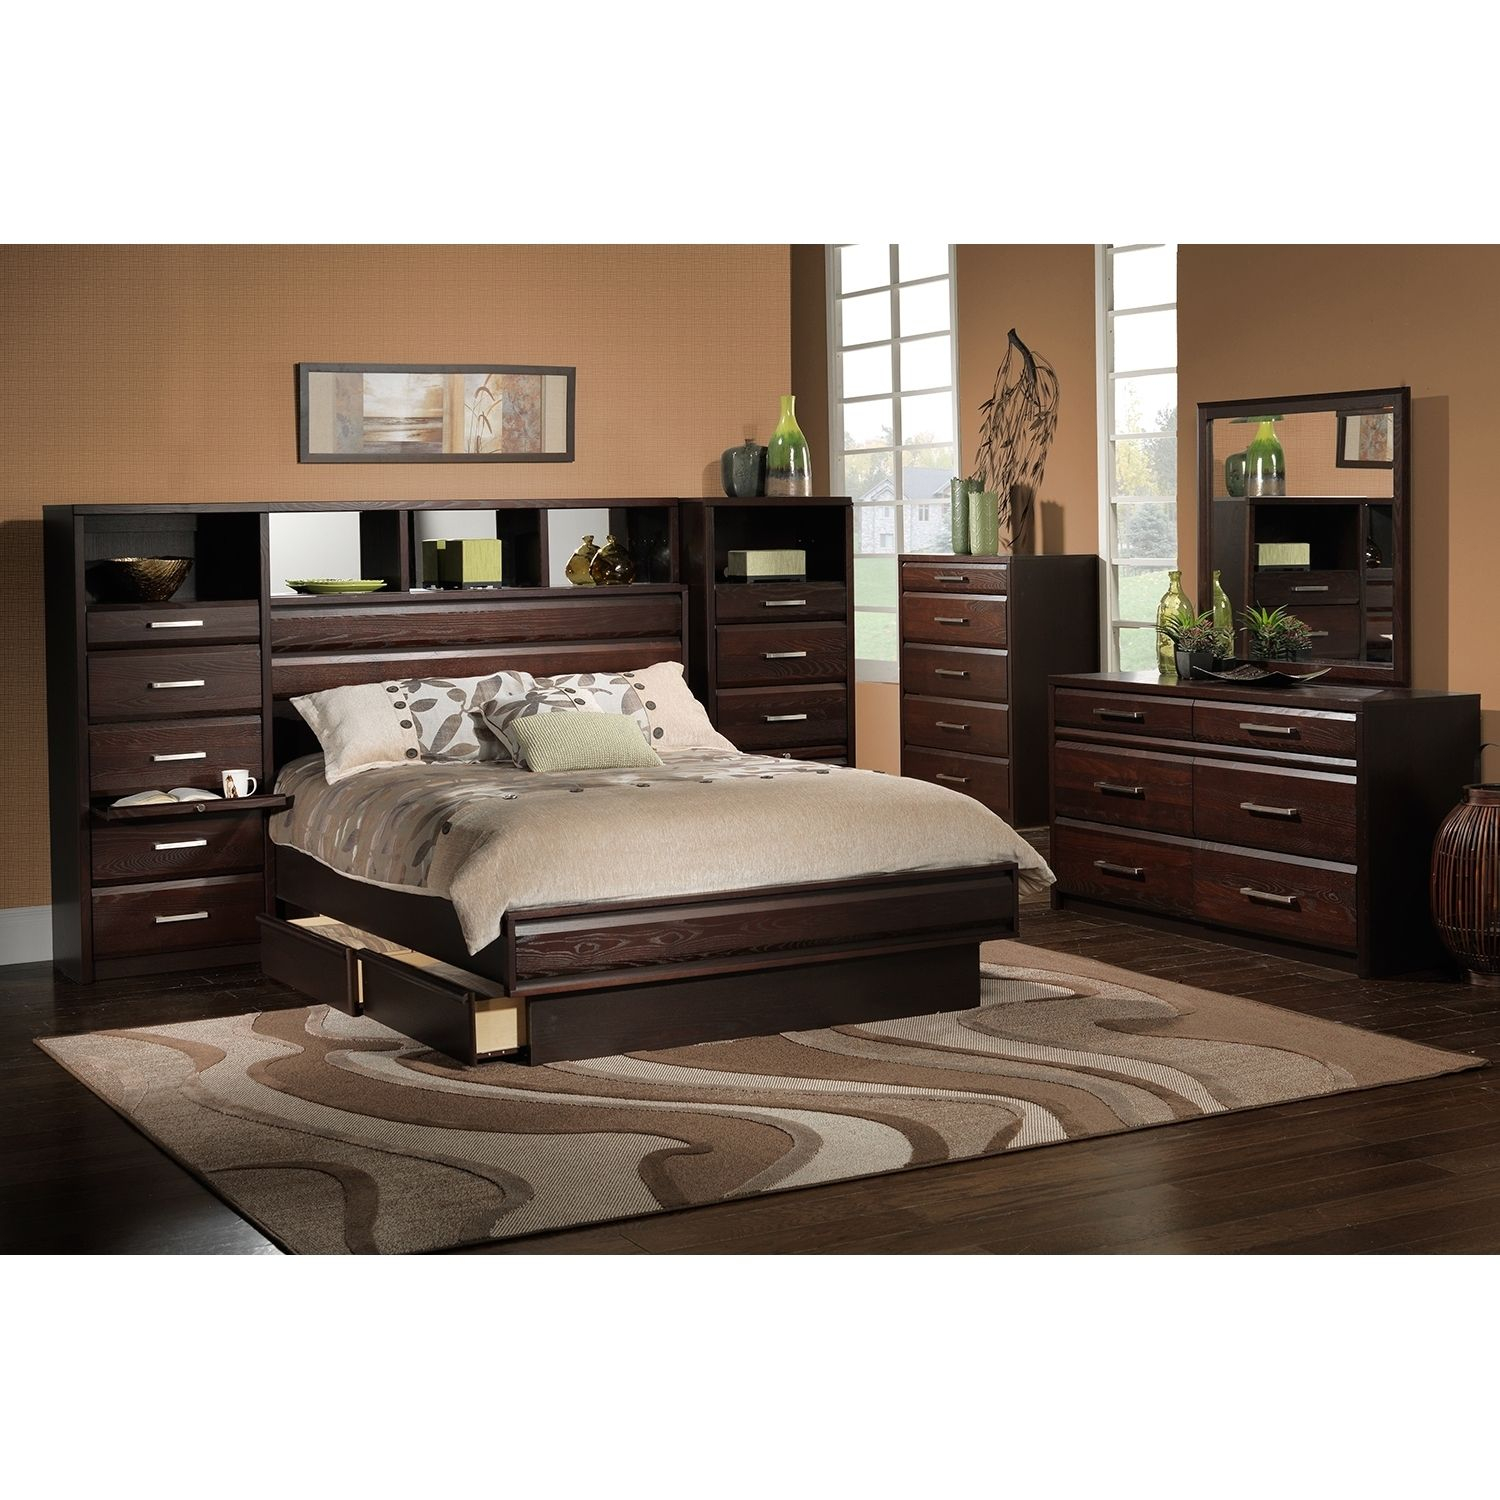 Tango Queen Wall Bed With Regard To Wall Unit Bedroom Furniture for measurements 1500 X 1500